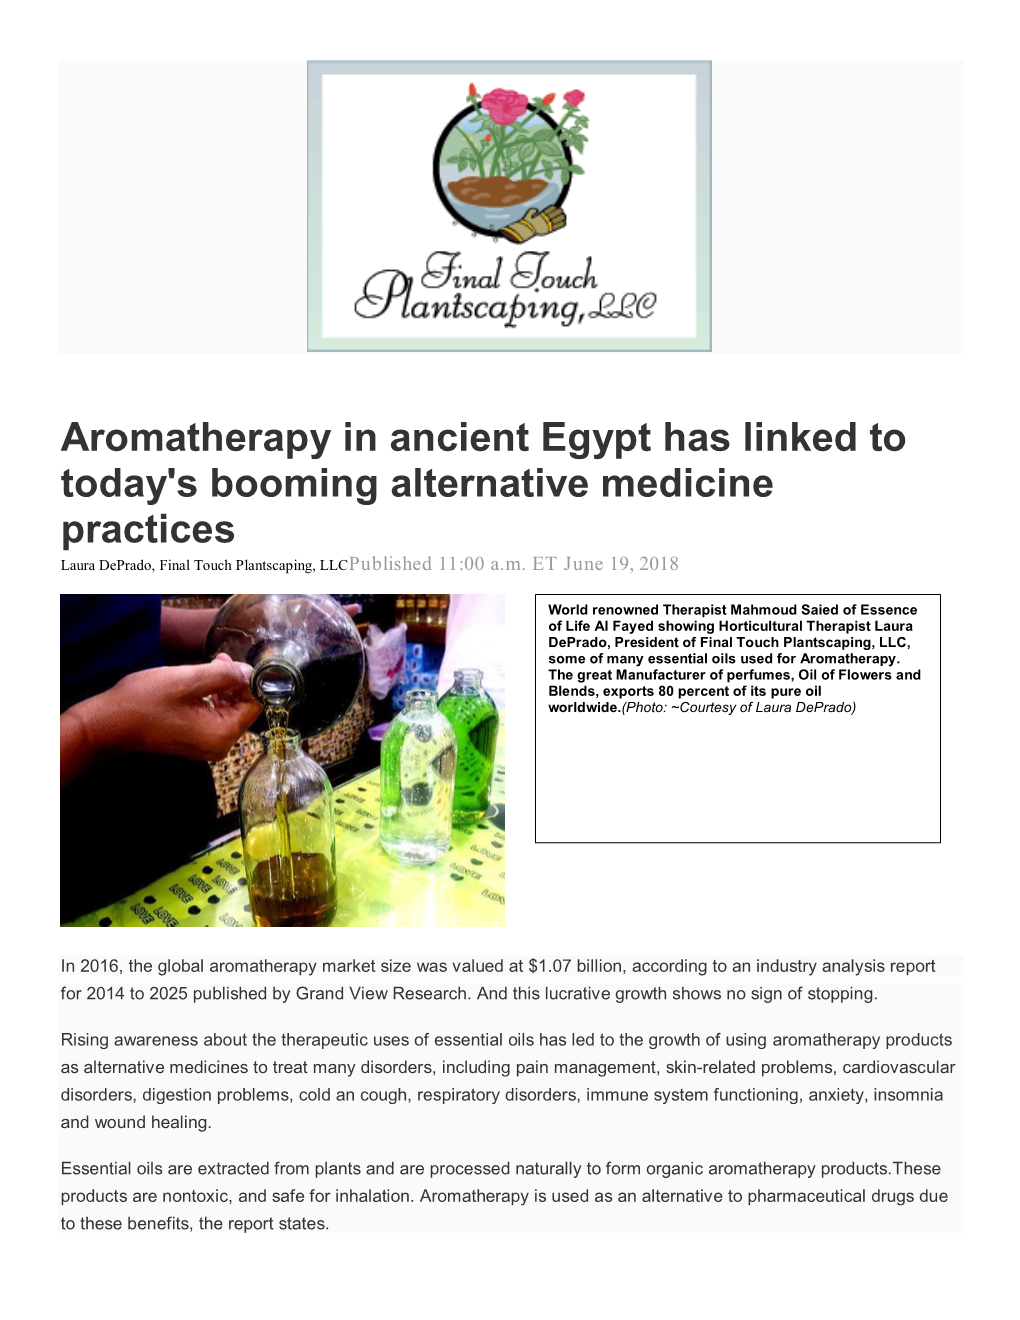 Aromatherapy in Ancient Egypt Has Linked to Today's Booming Alternative Medicine Practices Laura Deprado, Final Touch Plantscaping, Llcpublished 11:00 A.M